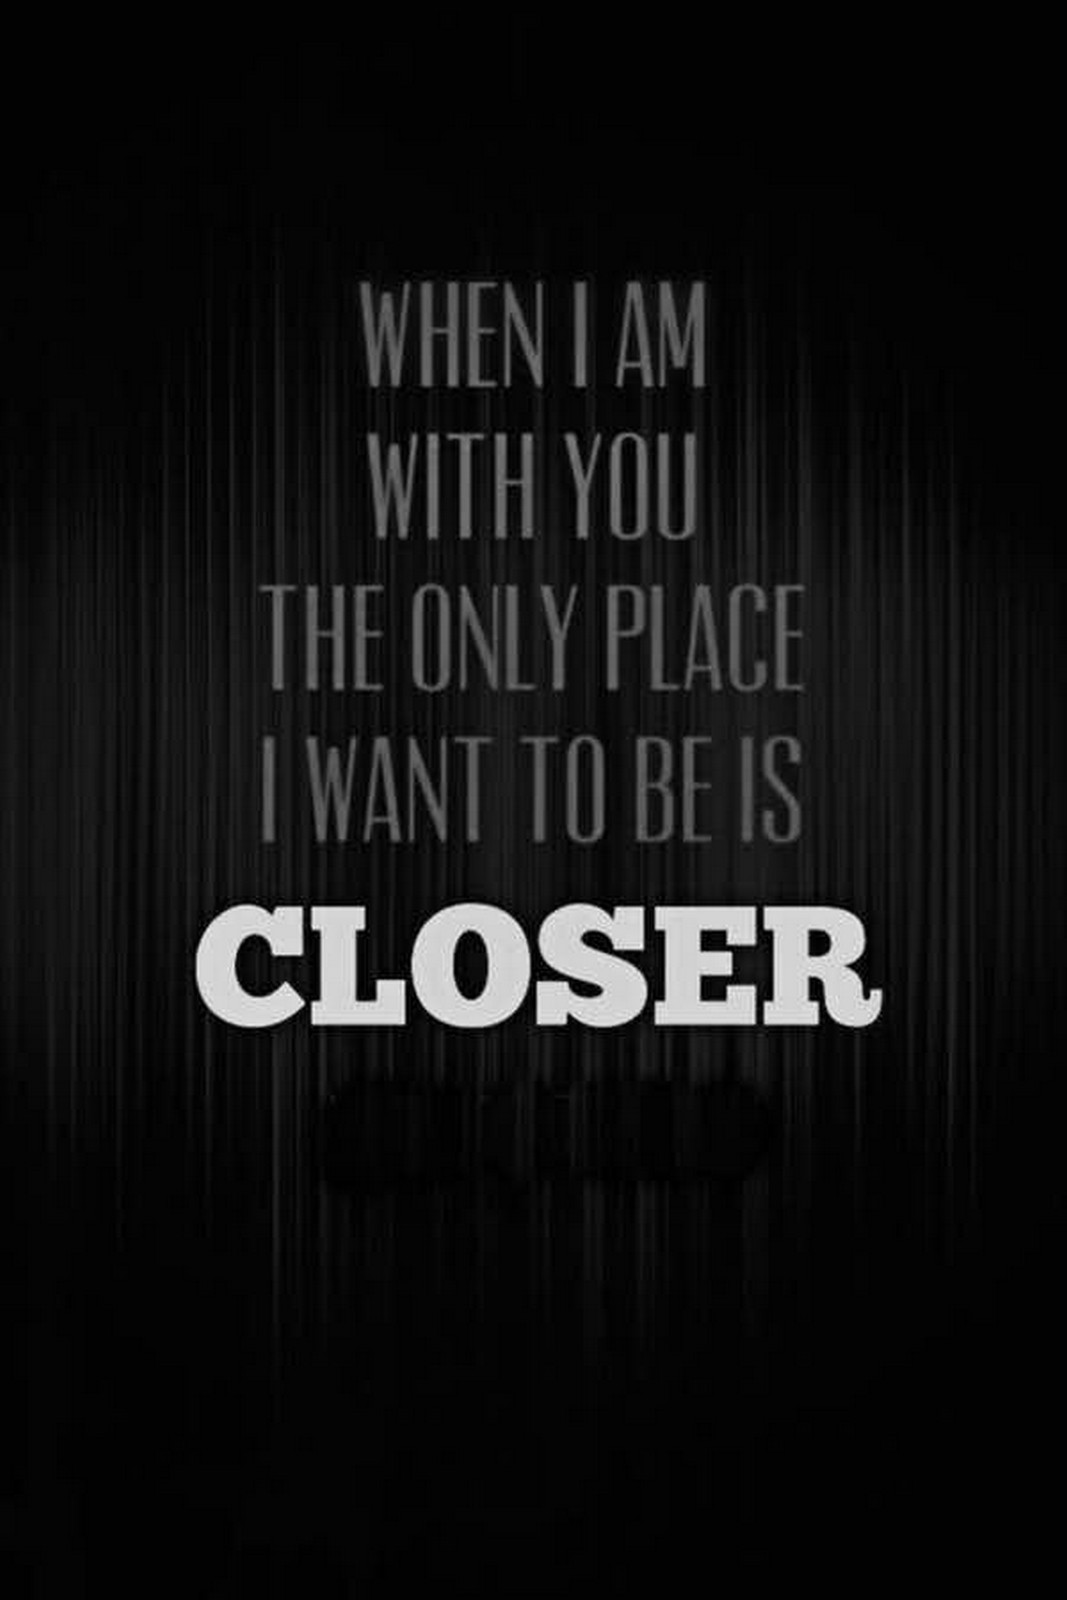 55 Romantic Quotes - "When I am with you, the only place I want to be is closer."